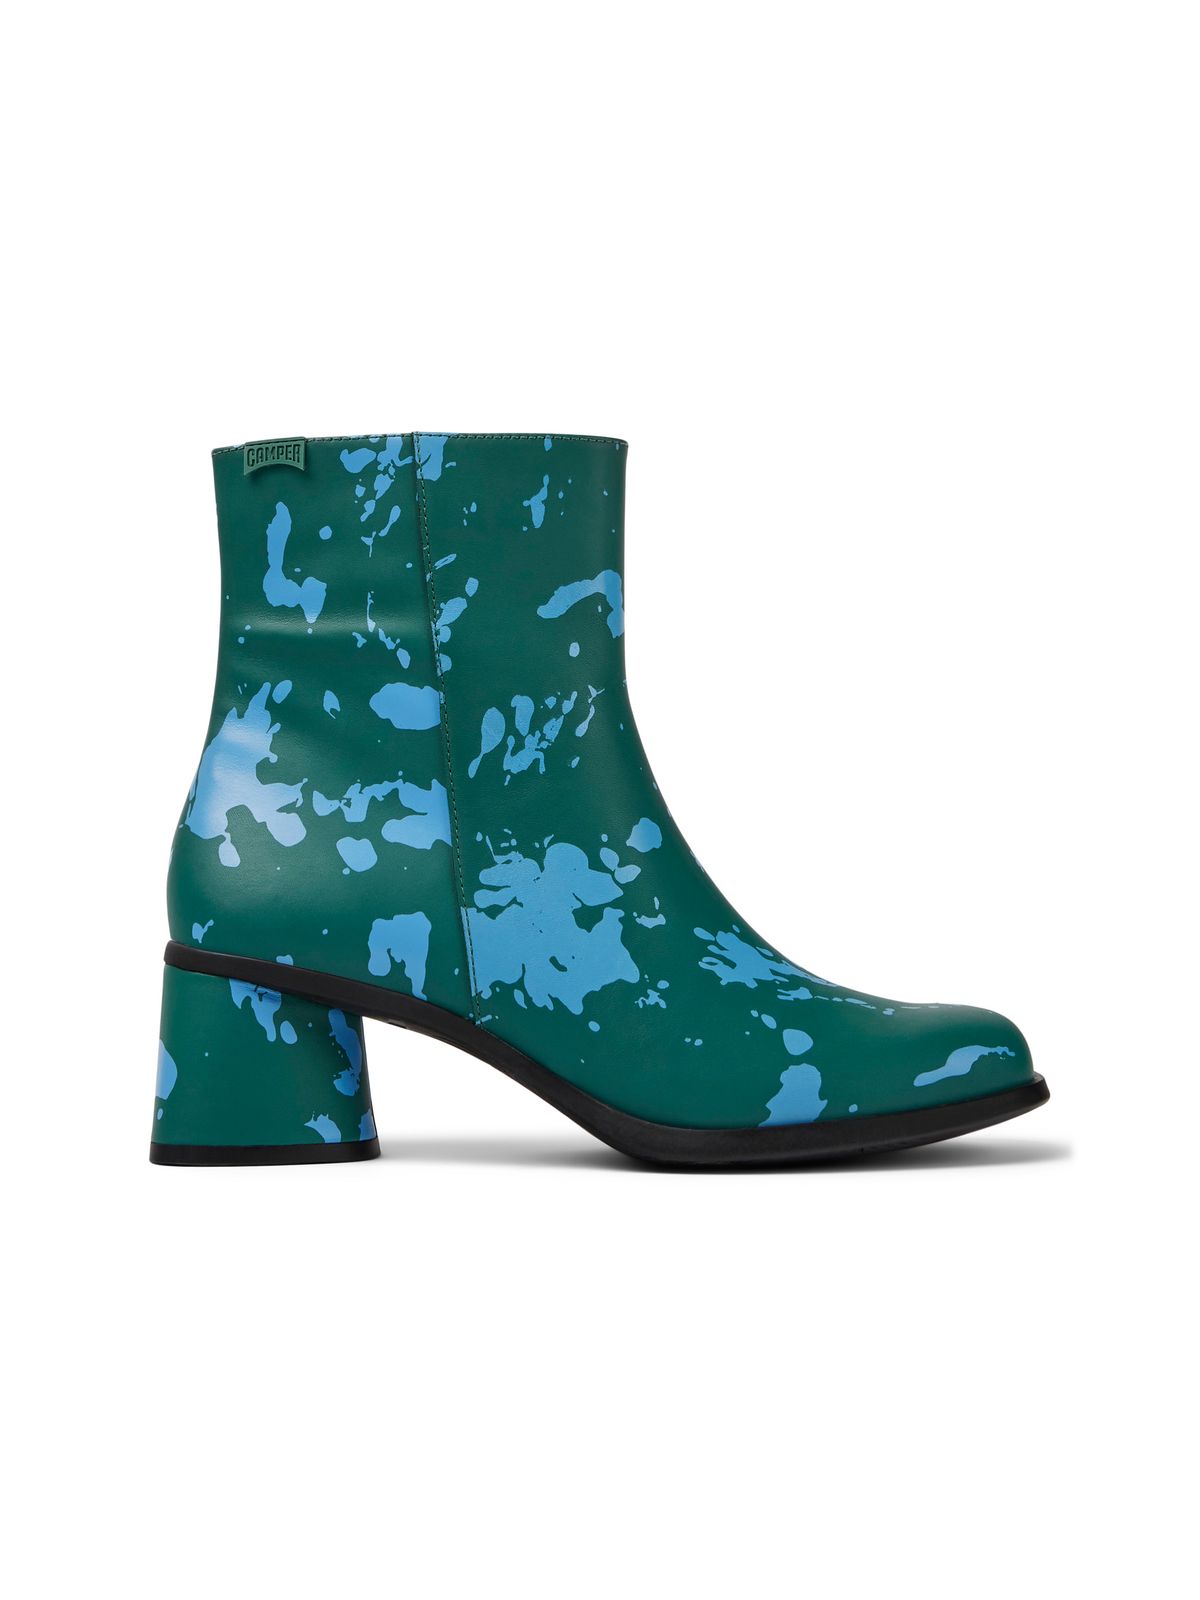 Ankle boots green colour